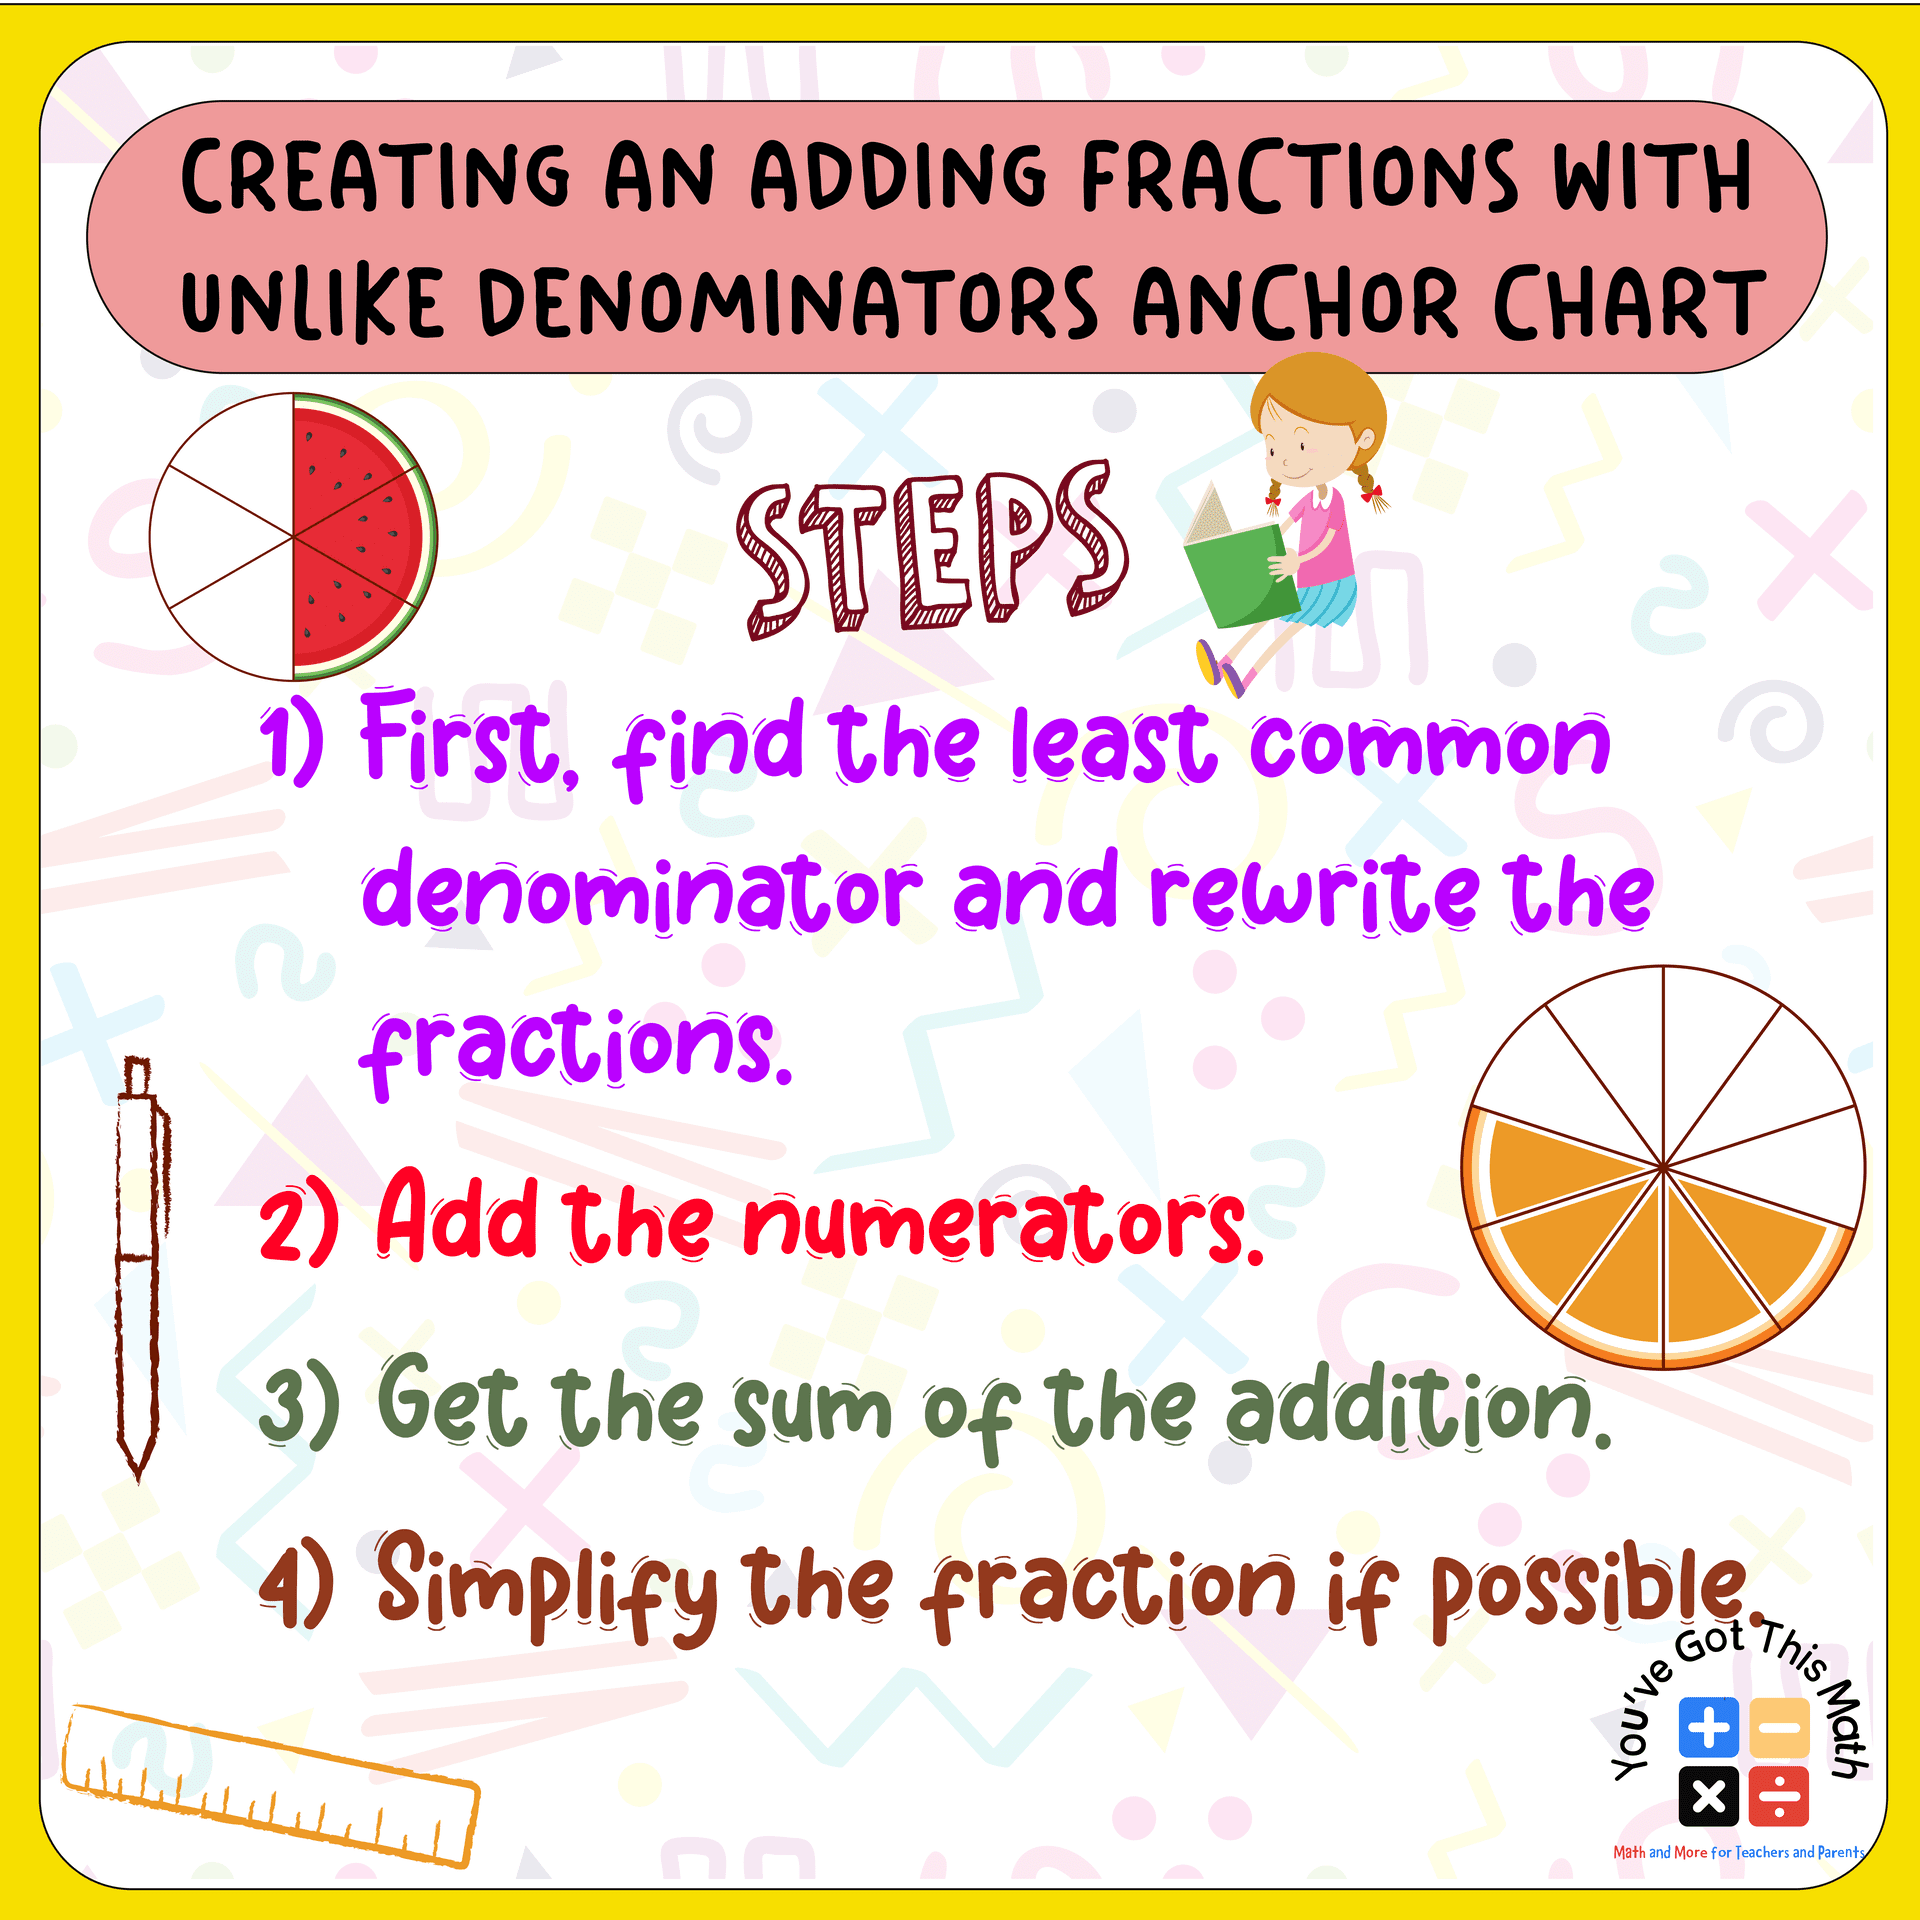 Creating an adding fractions with unlike denominators anchor chart